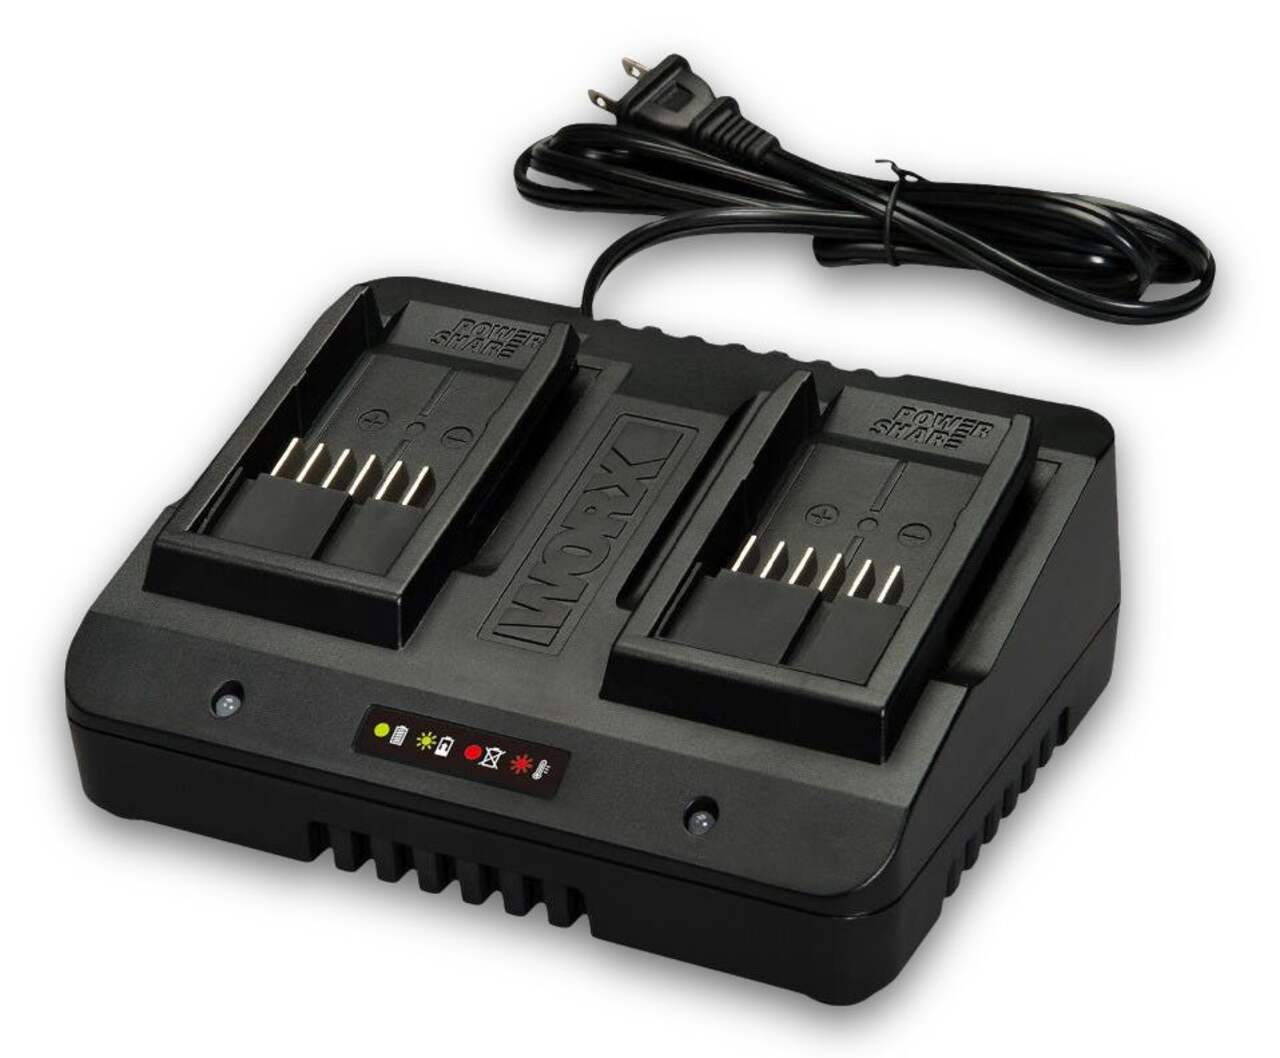 WORX 20V Lithium-ion Dual Port Charger